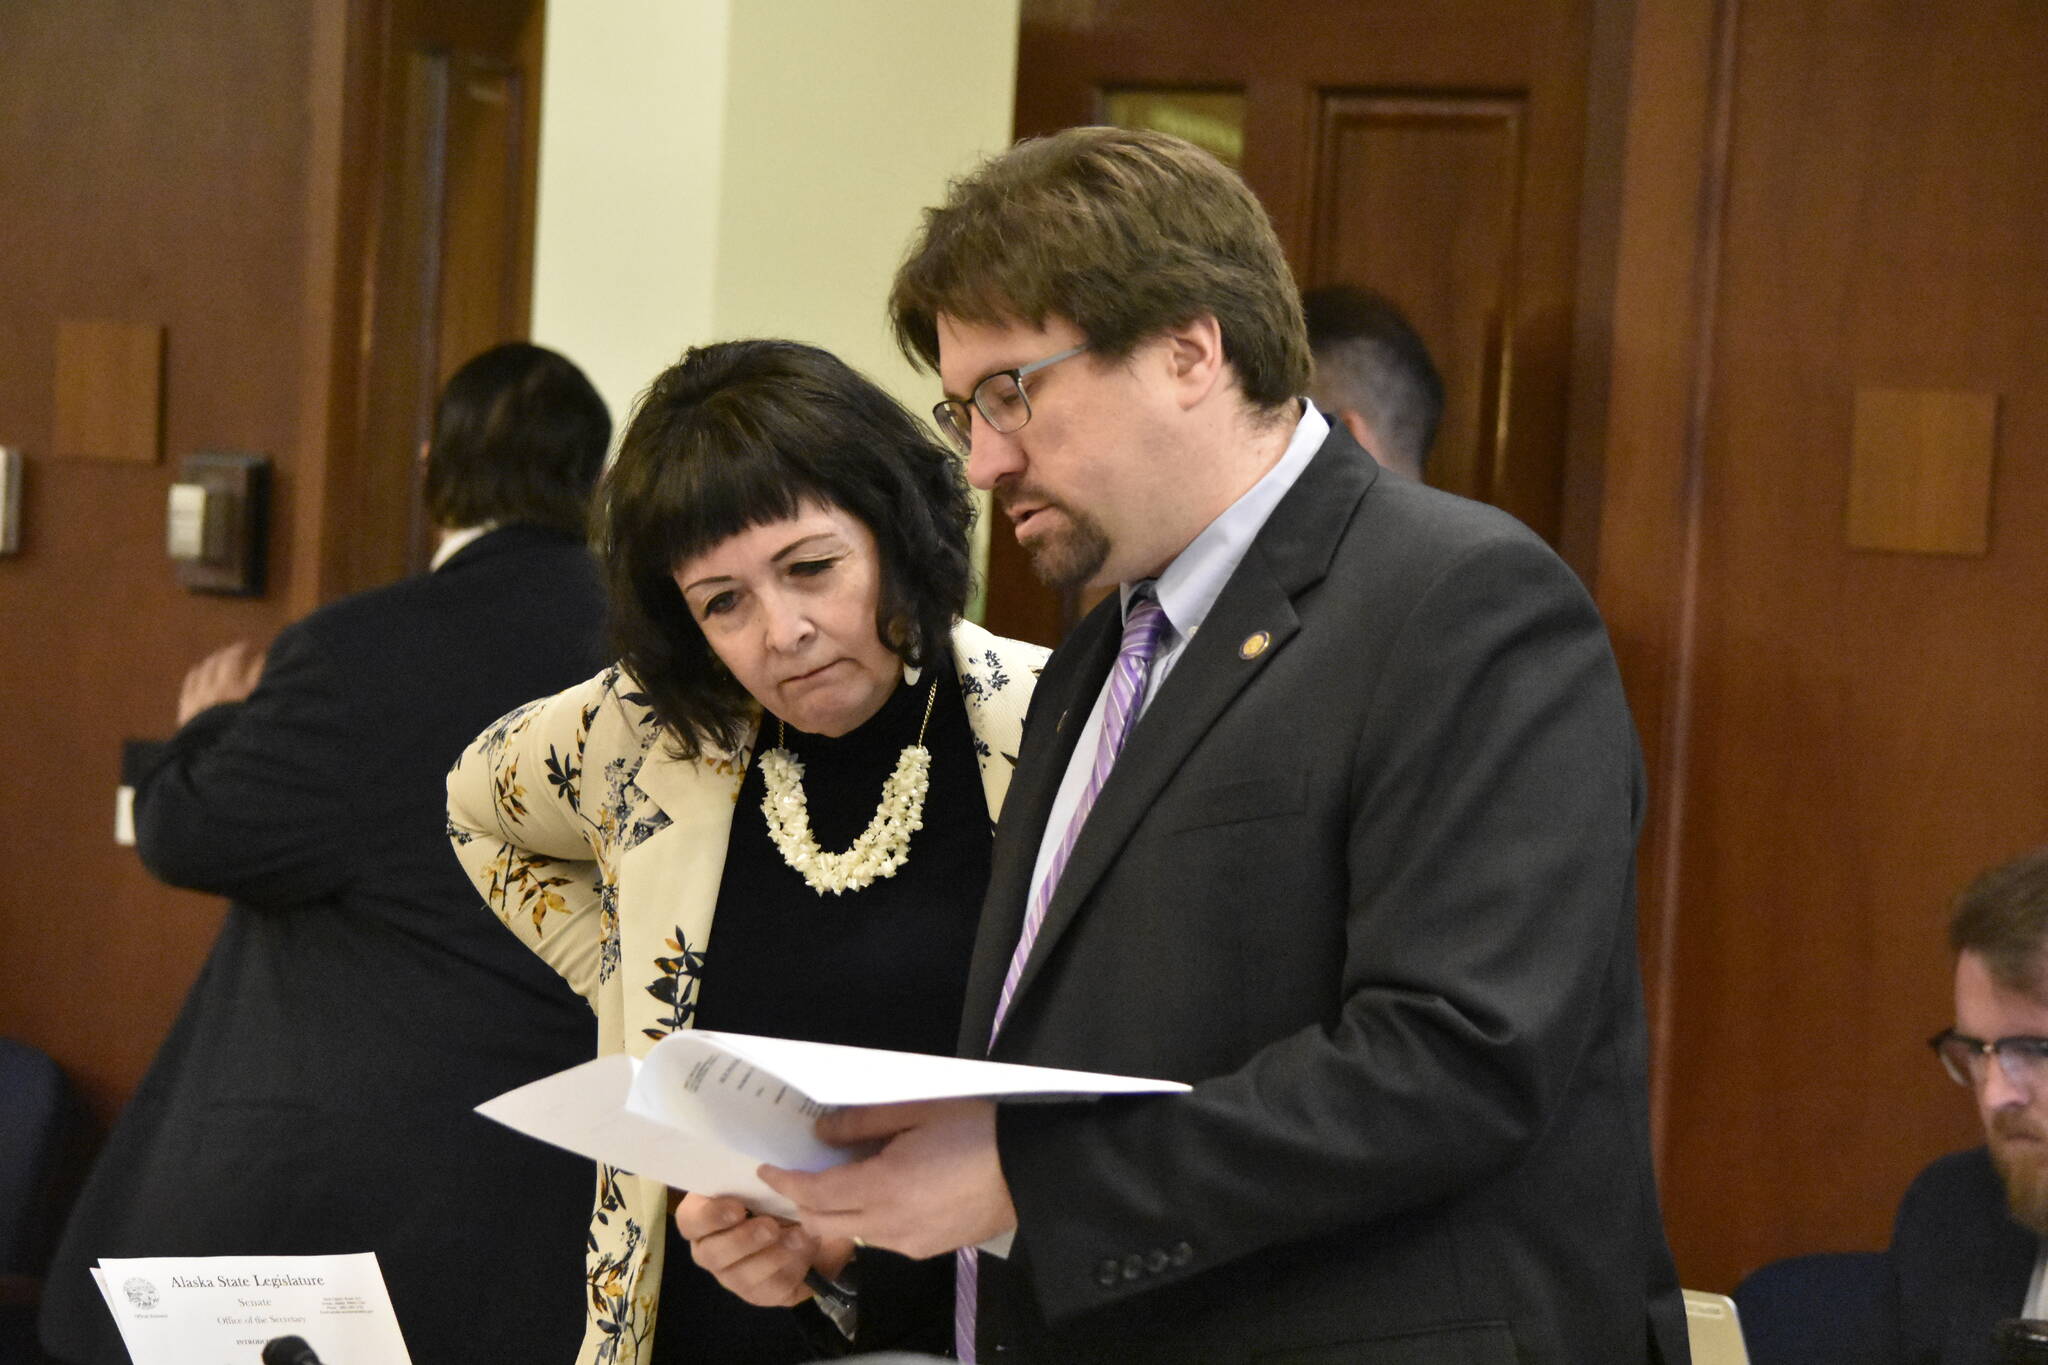 Sens. Shelley Hughes, R-Palmer, left, and Robert Myers, R-North Pole, read through one of 41 amendments submitted to the state's omnibus budget bill being debate on the floor of the Alaska State Senate on Monday, May 9, 2022. (Peter Segall / Juneau Empire)